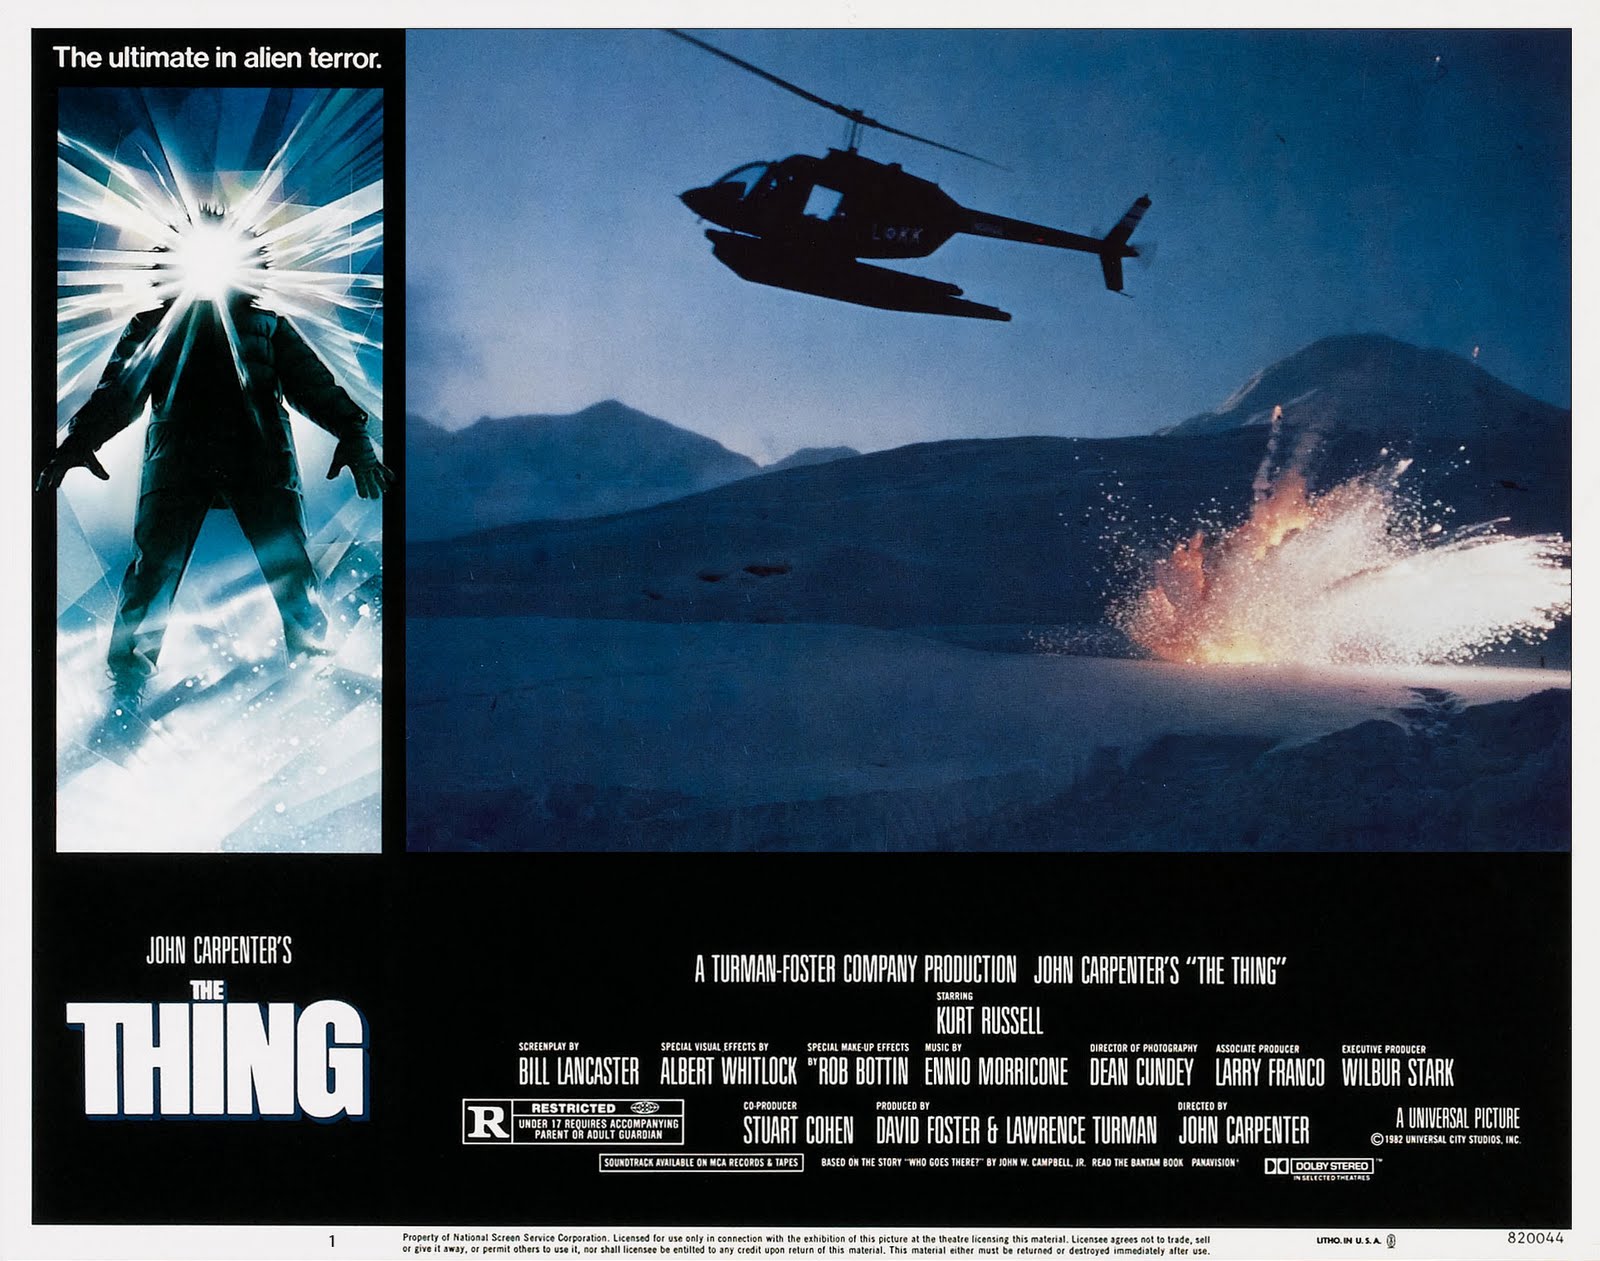 John Carpenter’s The Thing Comes To Indoor Snow